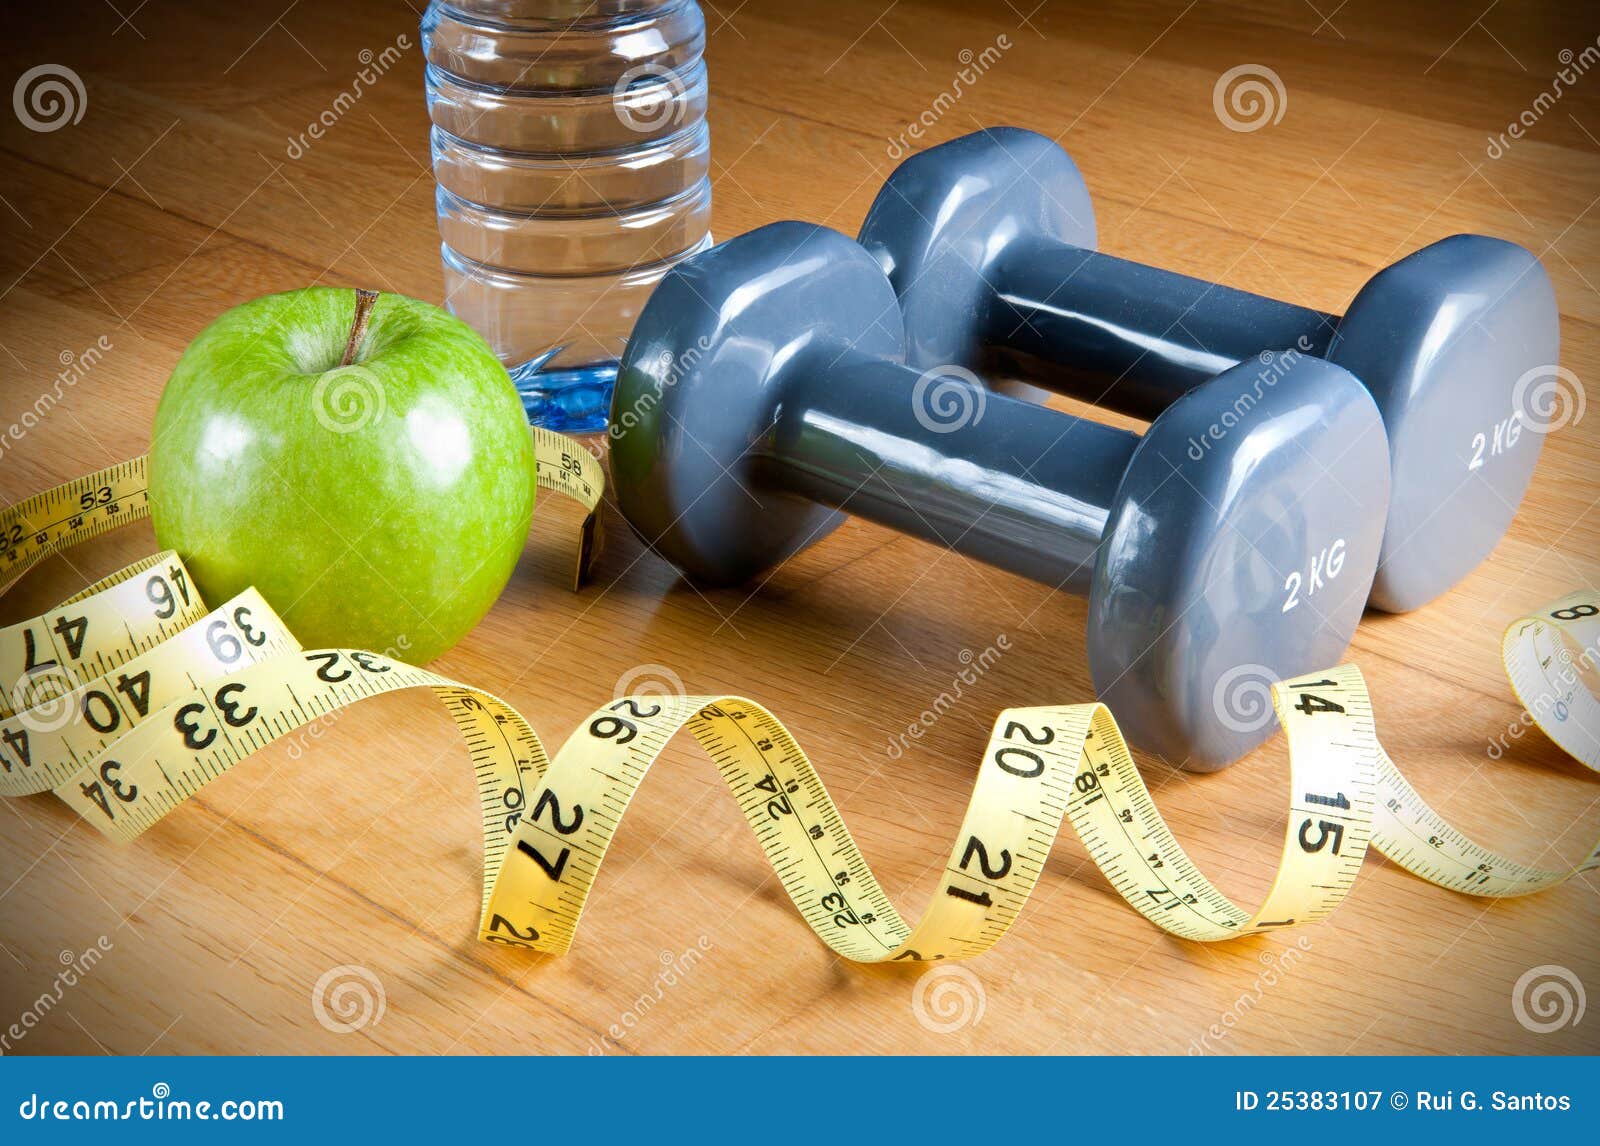 exercise and healthy diet